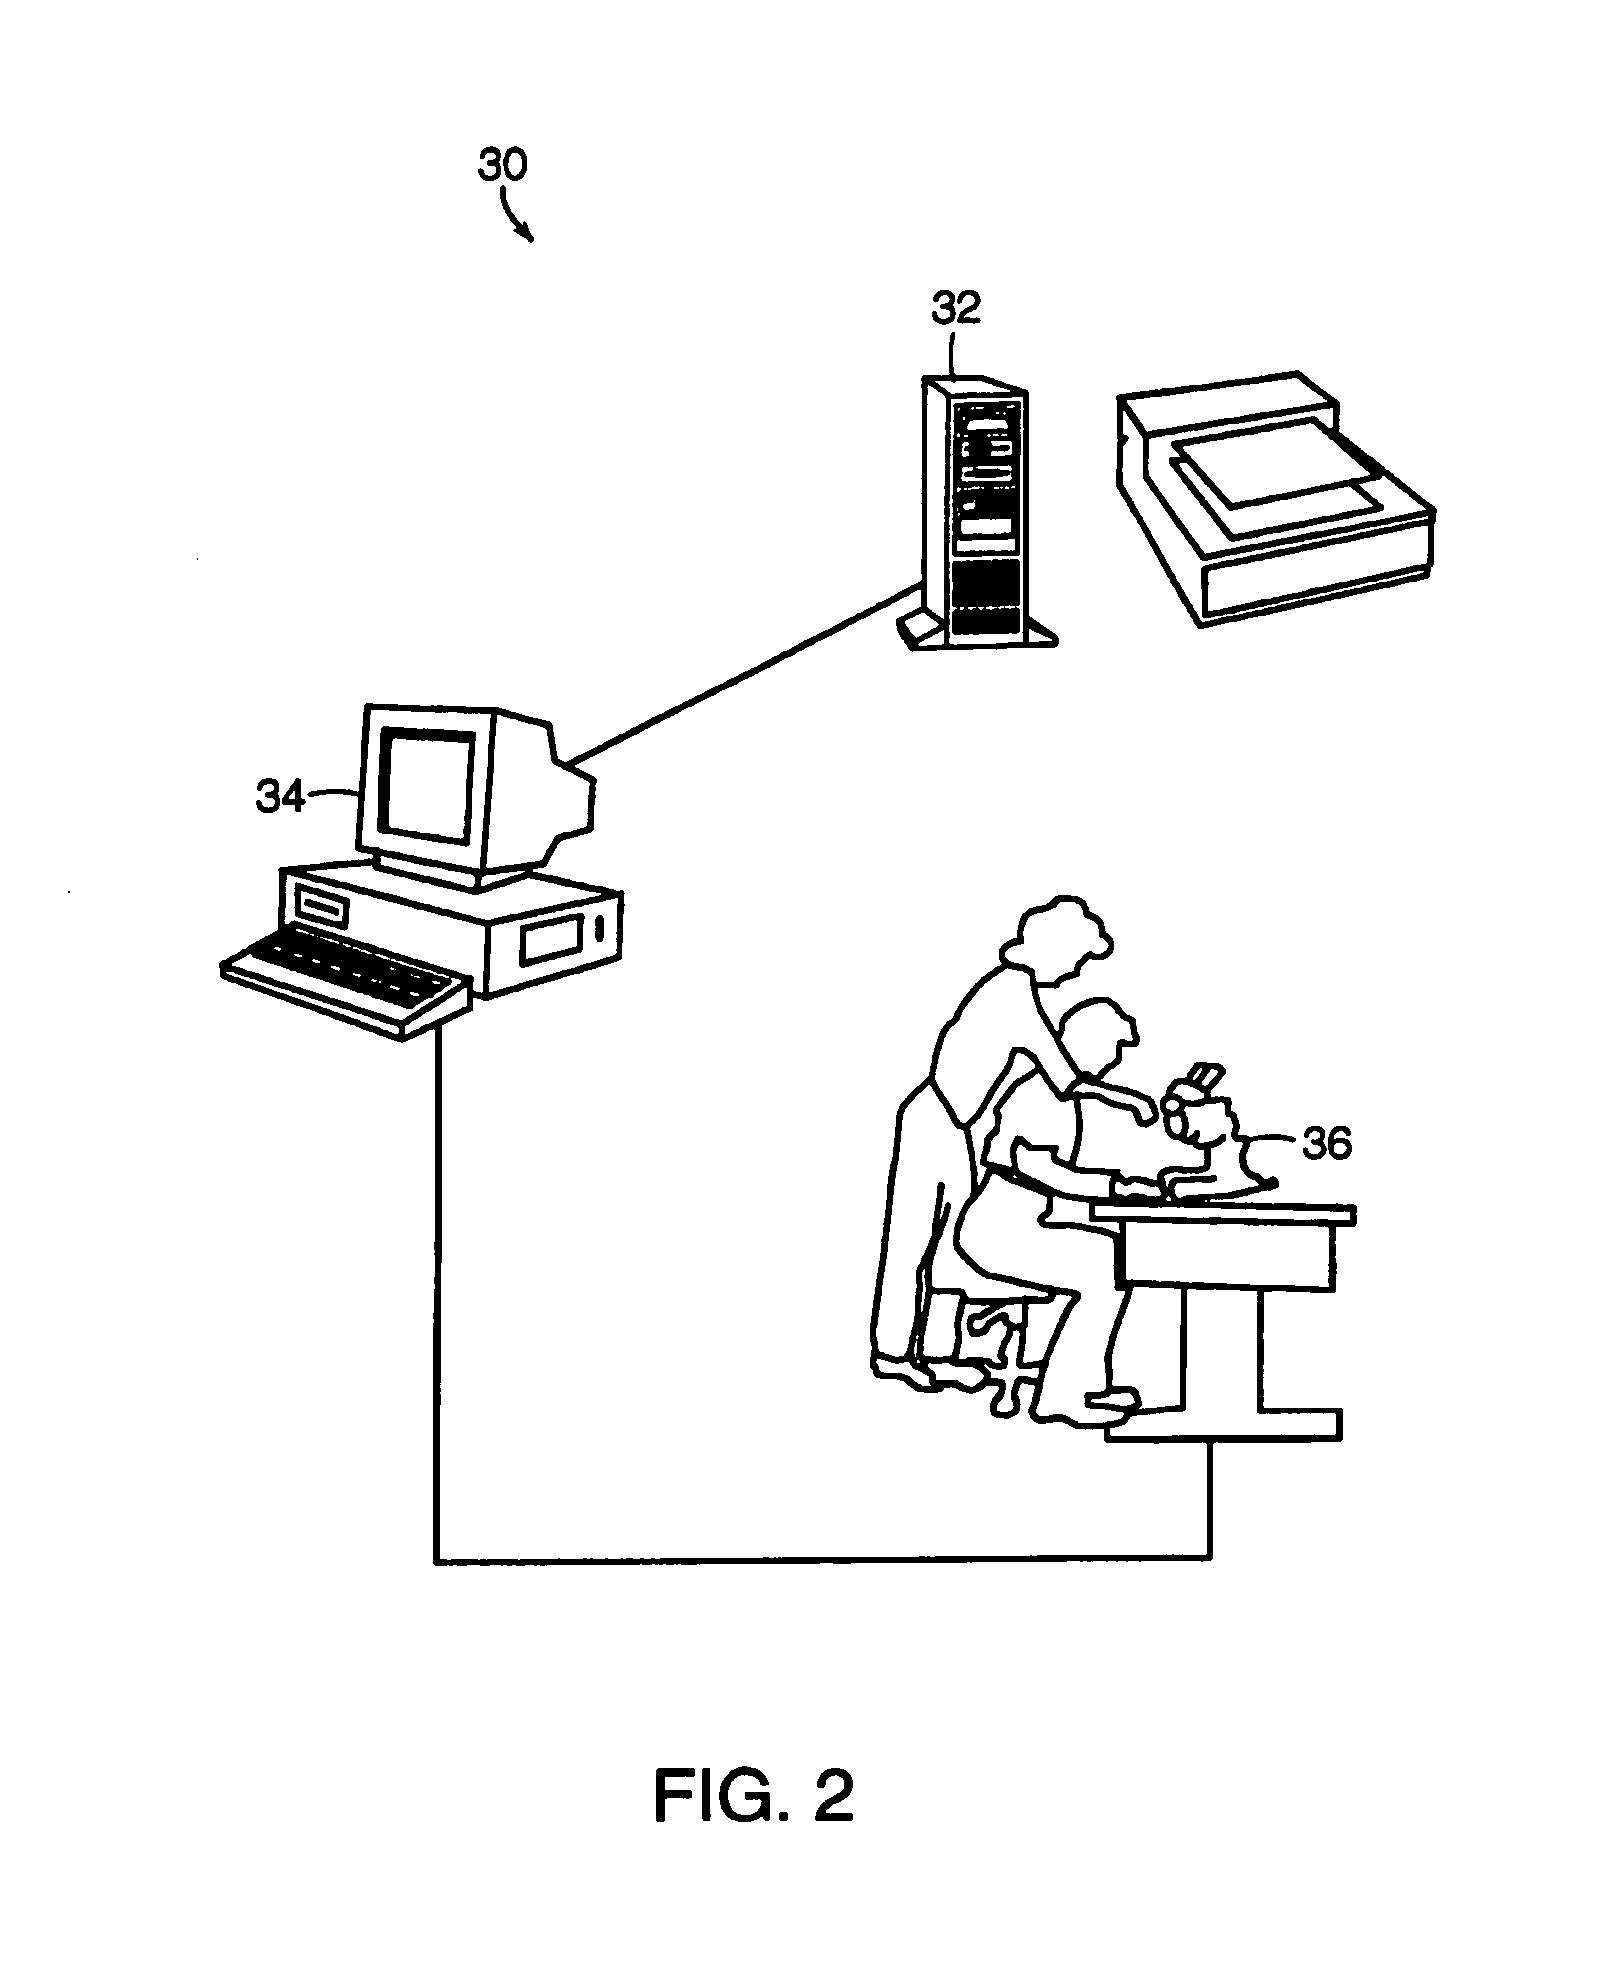 Apparatus and methods for verifying the location of areas of interest within a sample in an imaging system